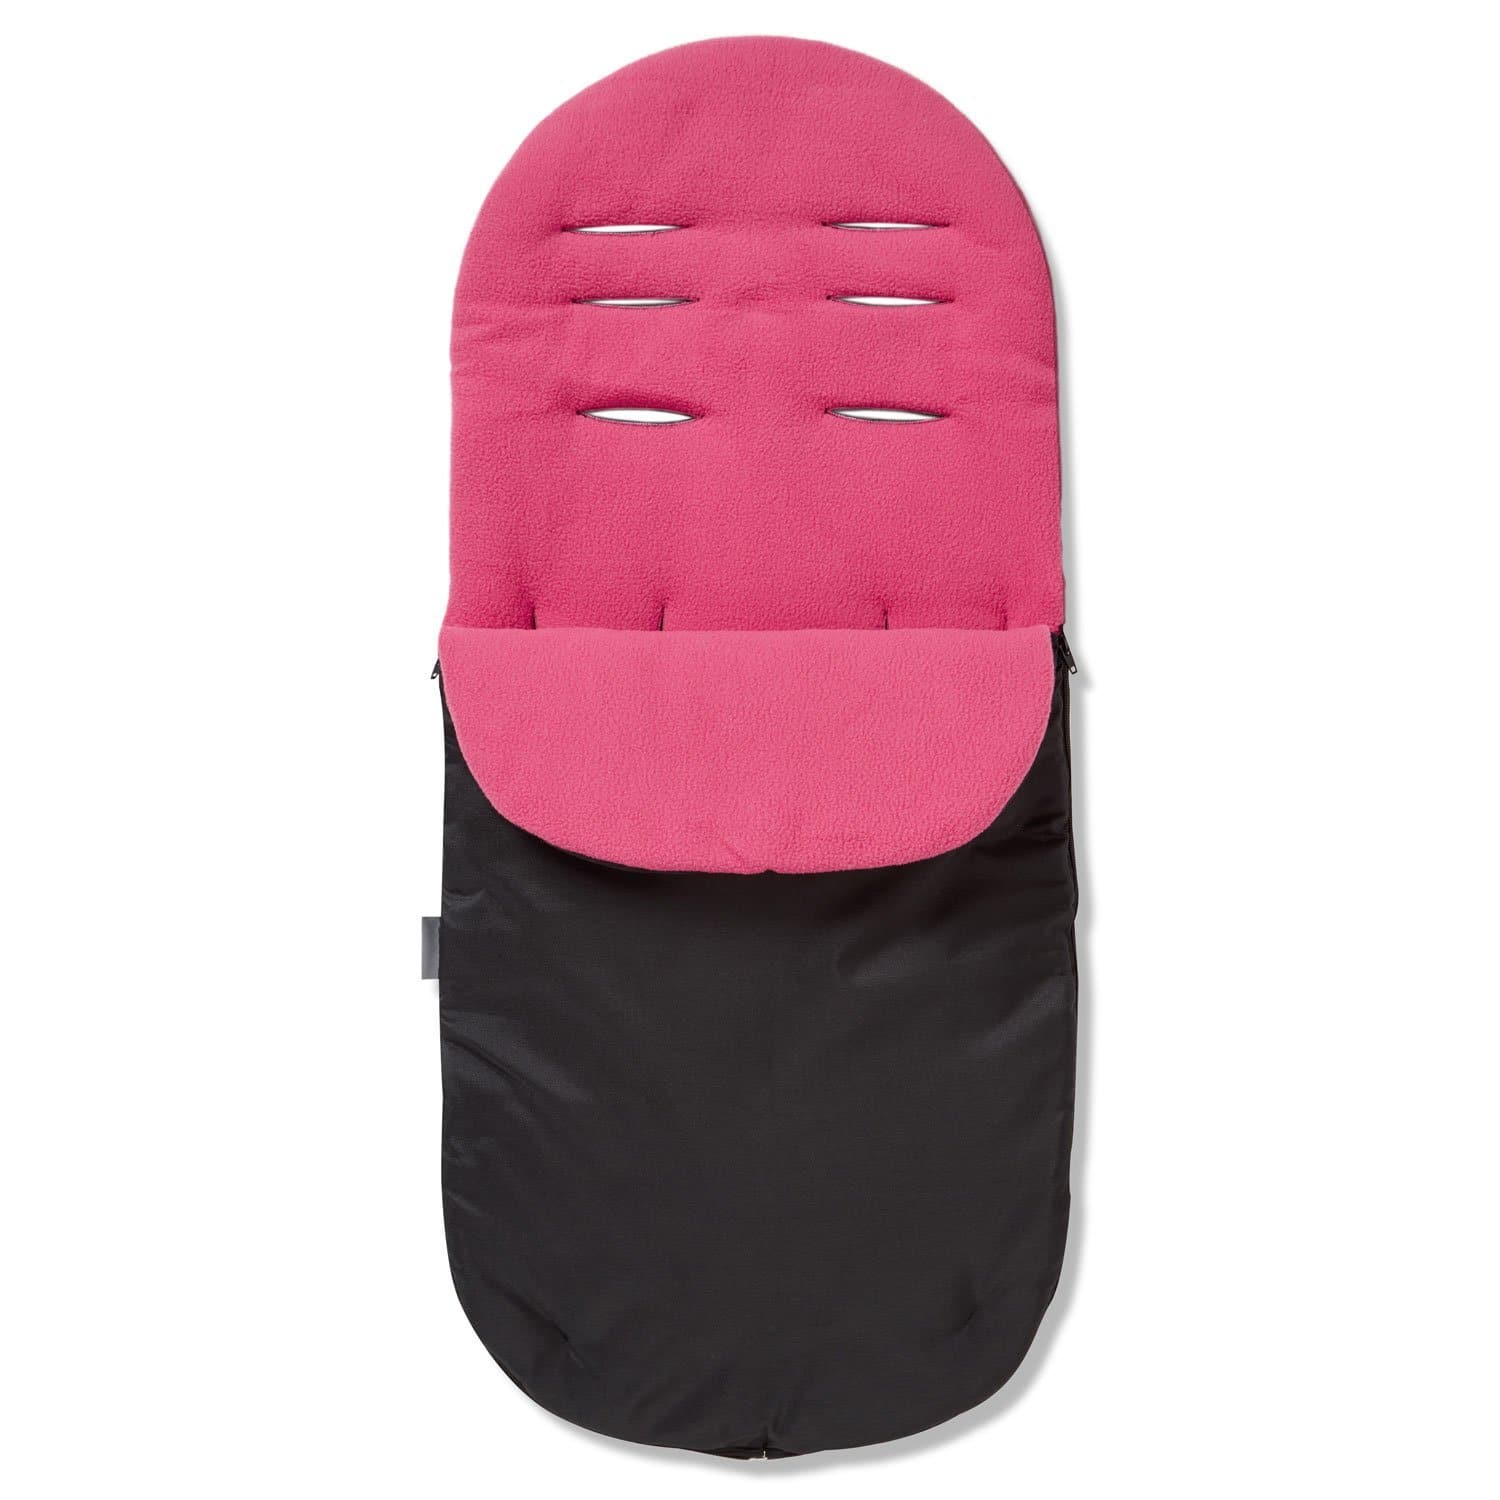 Footmuff / Cosy Toes Compatible with Bebecar - Dark Pink / Fits All Models | For Your Little One